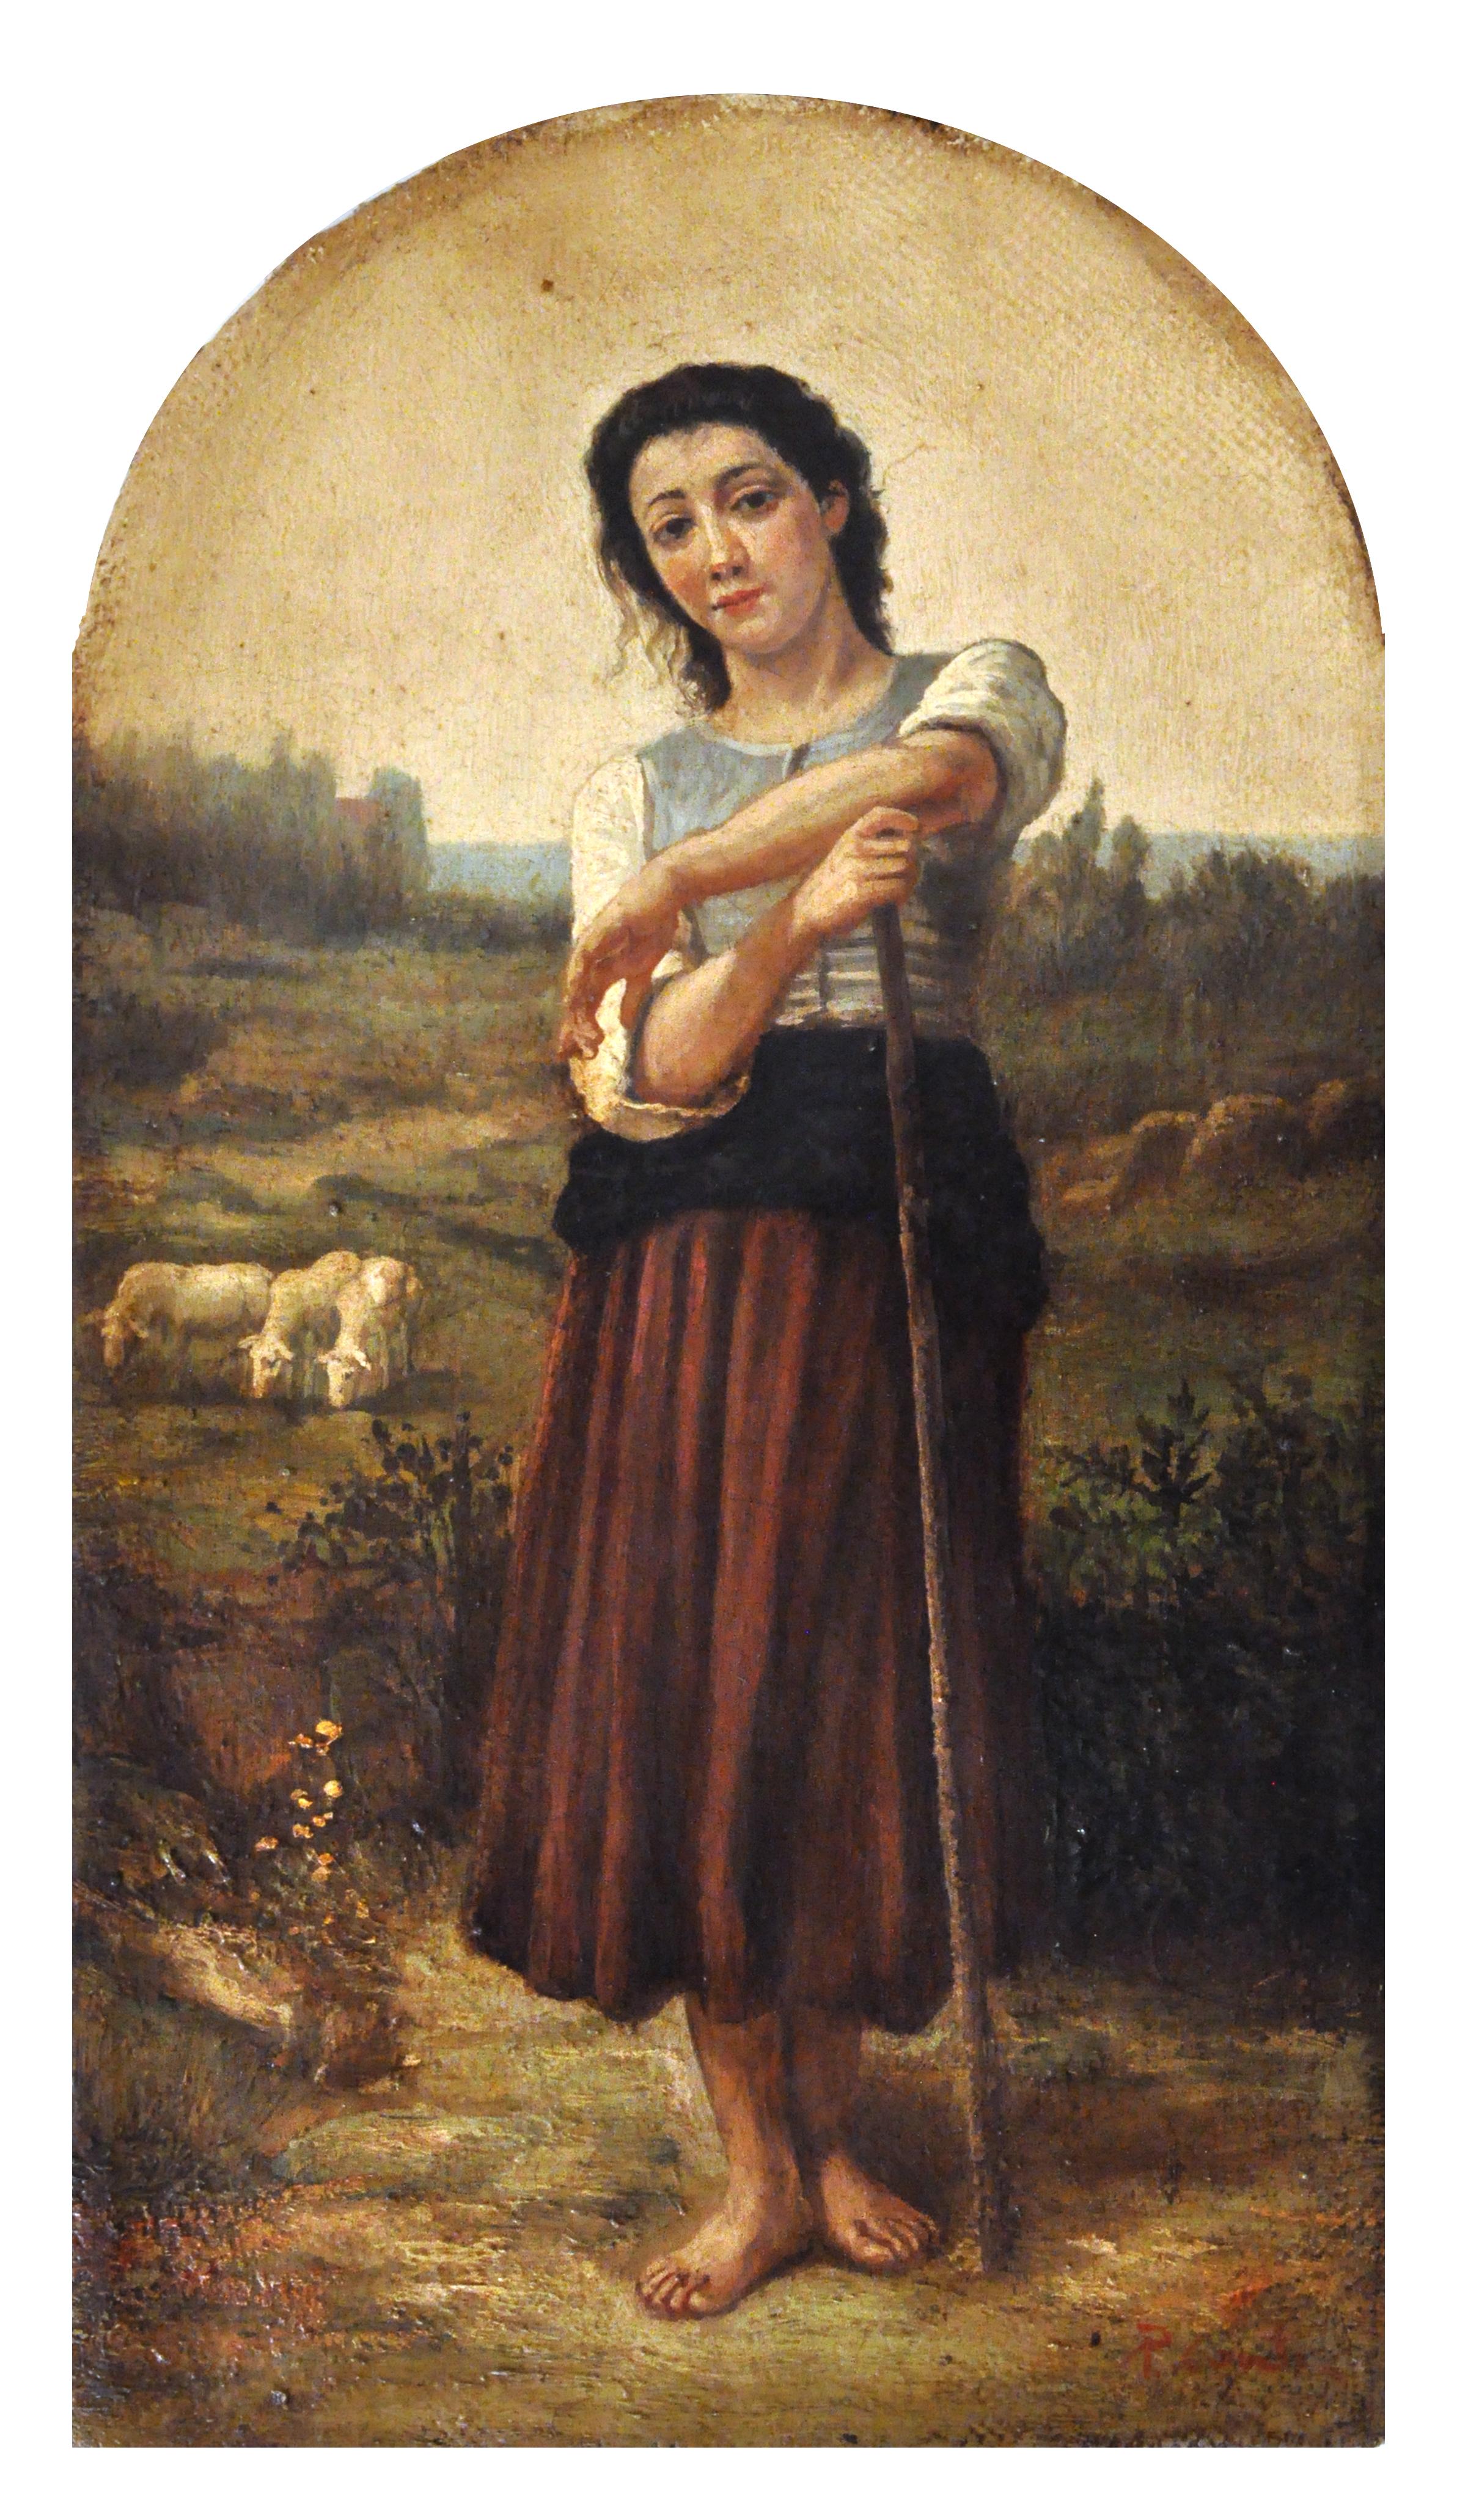 Country girl - Pietro Colonna Italia 2006 - Oil on canvas cm. 45x25
Gold gilded wooden frame available on request
The painting by Pietro Colonna is a reinterpretation of the Young Shepherdess by William-Adolphe Bouguereau, a French painter of the